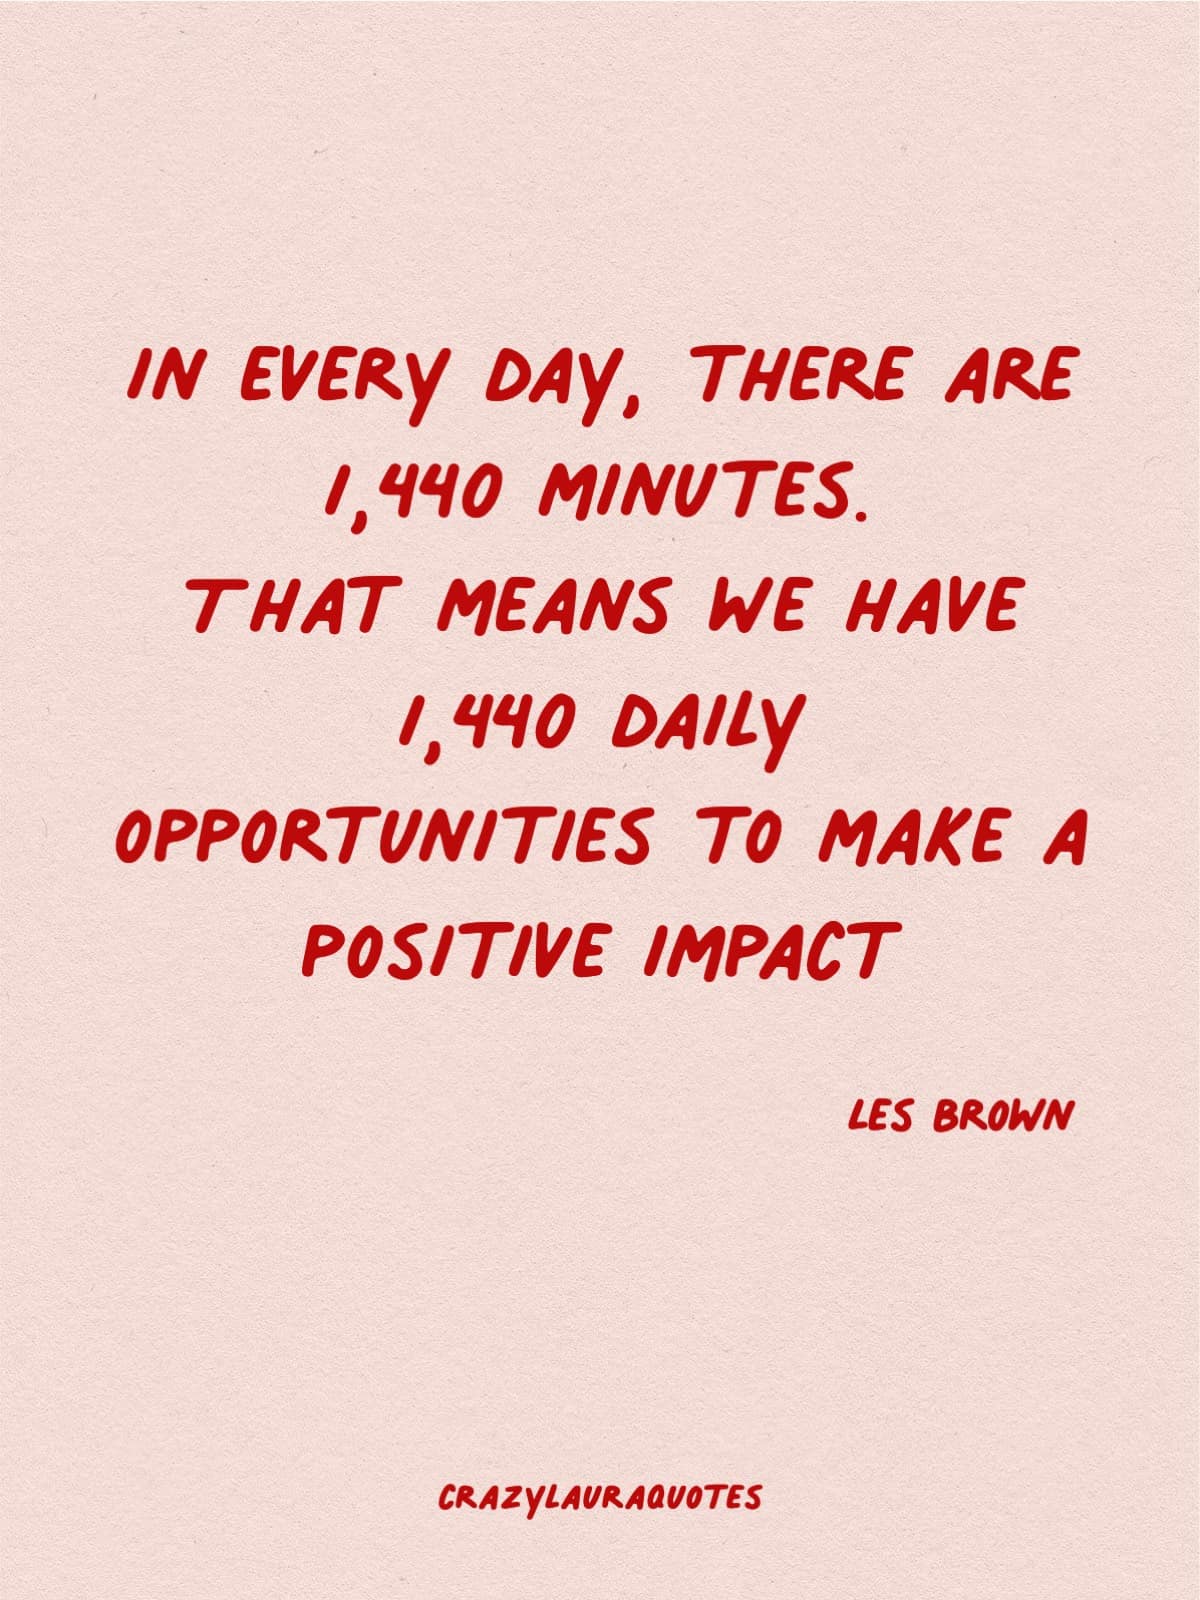 les brown qoute about daily opportunities